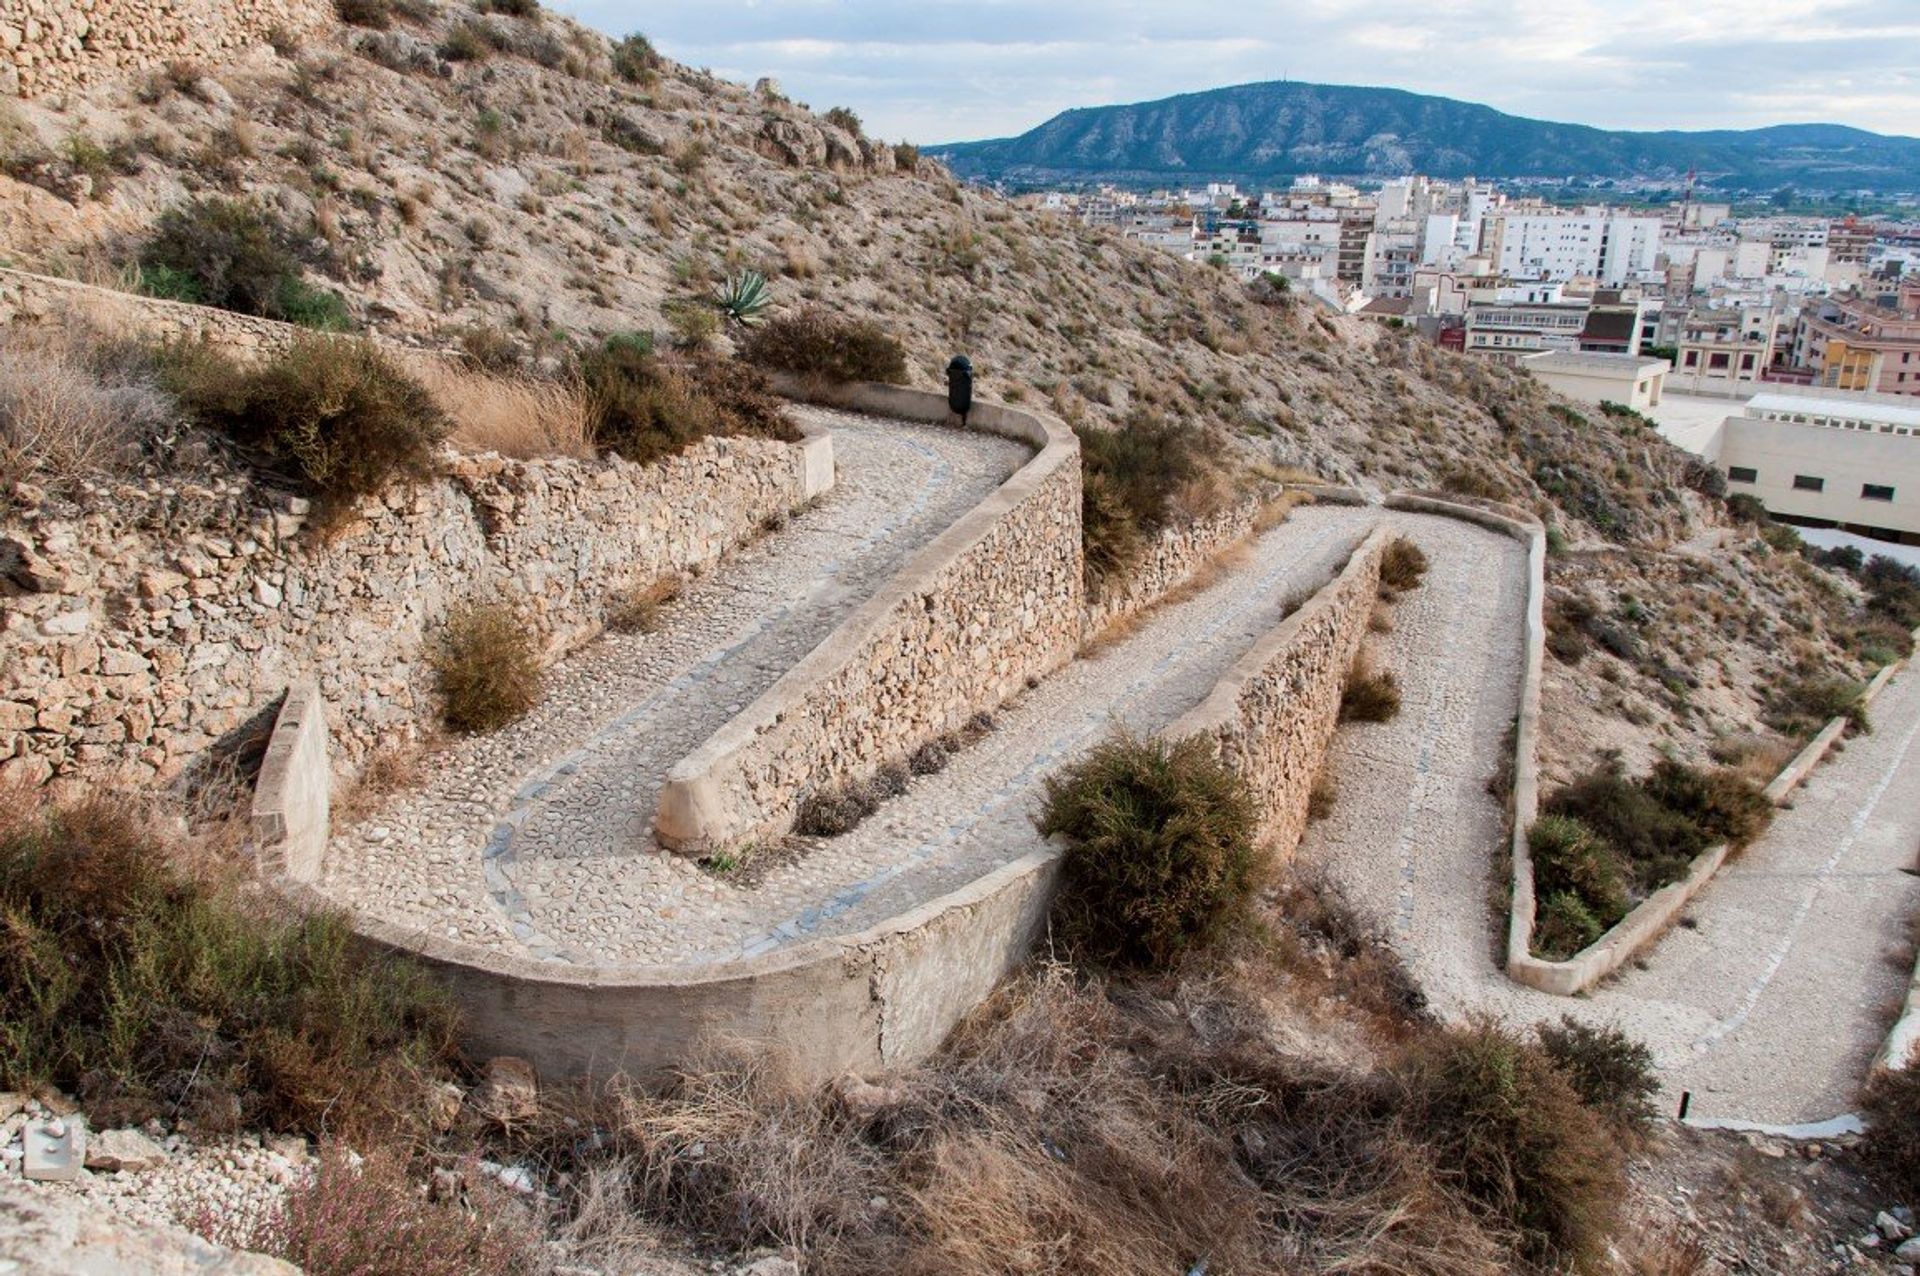 Orihuela boasts plenty of scenic hiking routes for off-road adventures